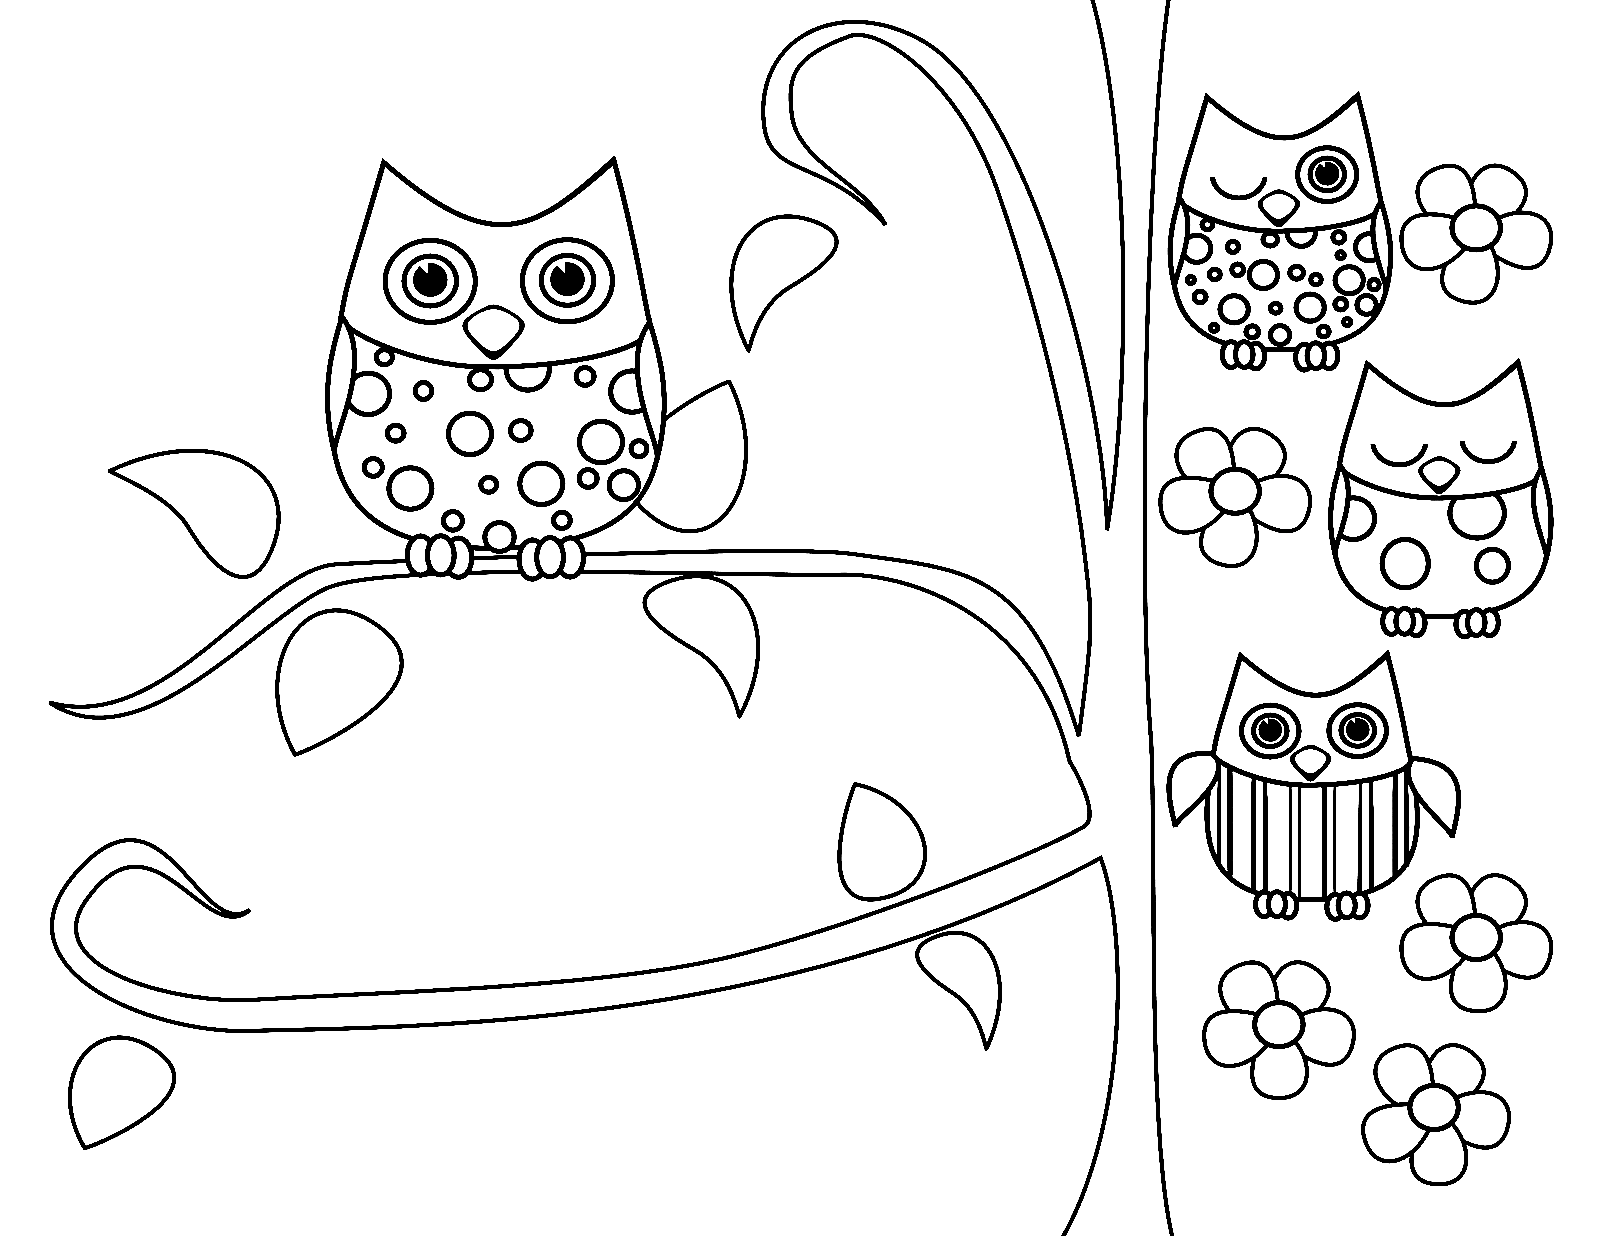 Fun Owls Coloring Pages